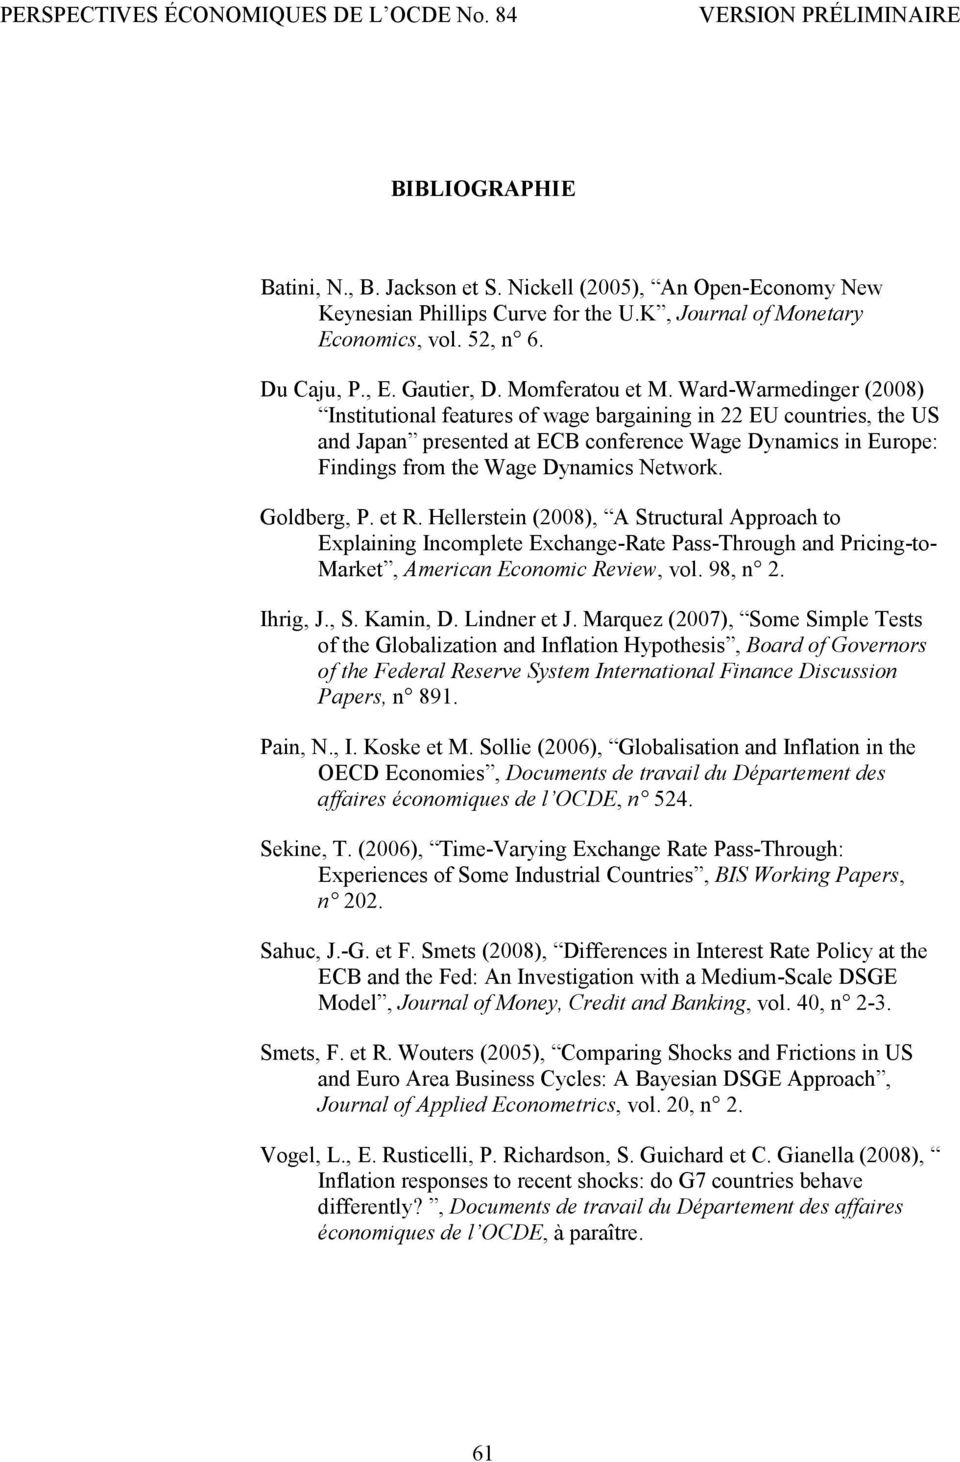 Hellersein (8), A Srucural Approach o Explaining Incomplee Exchange-Rae Pass-Through and Pricing-o- Marke, American Economic Review, vol. 98, n. Ihrig, J., S. Kamin, D. Lindner e J.